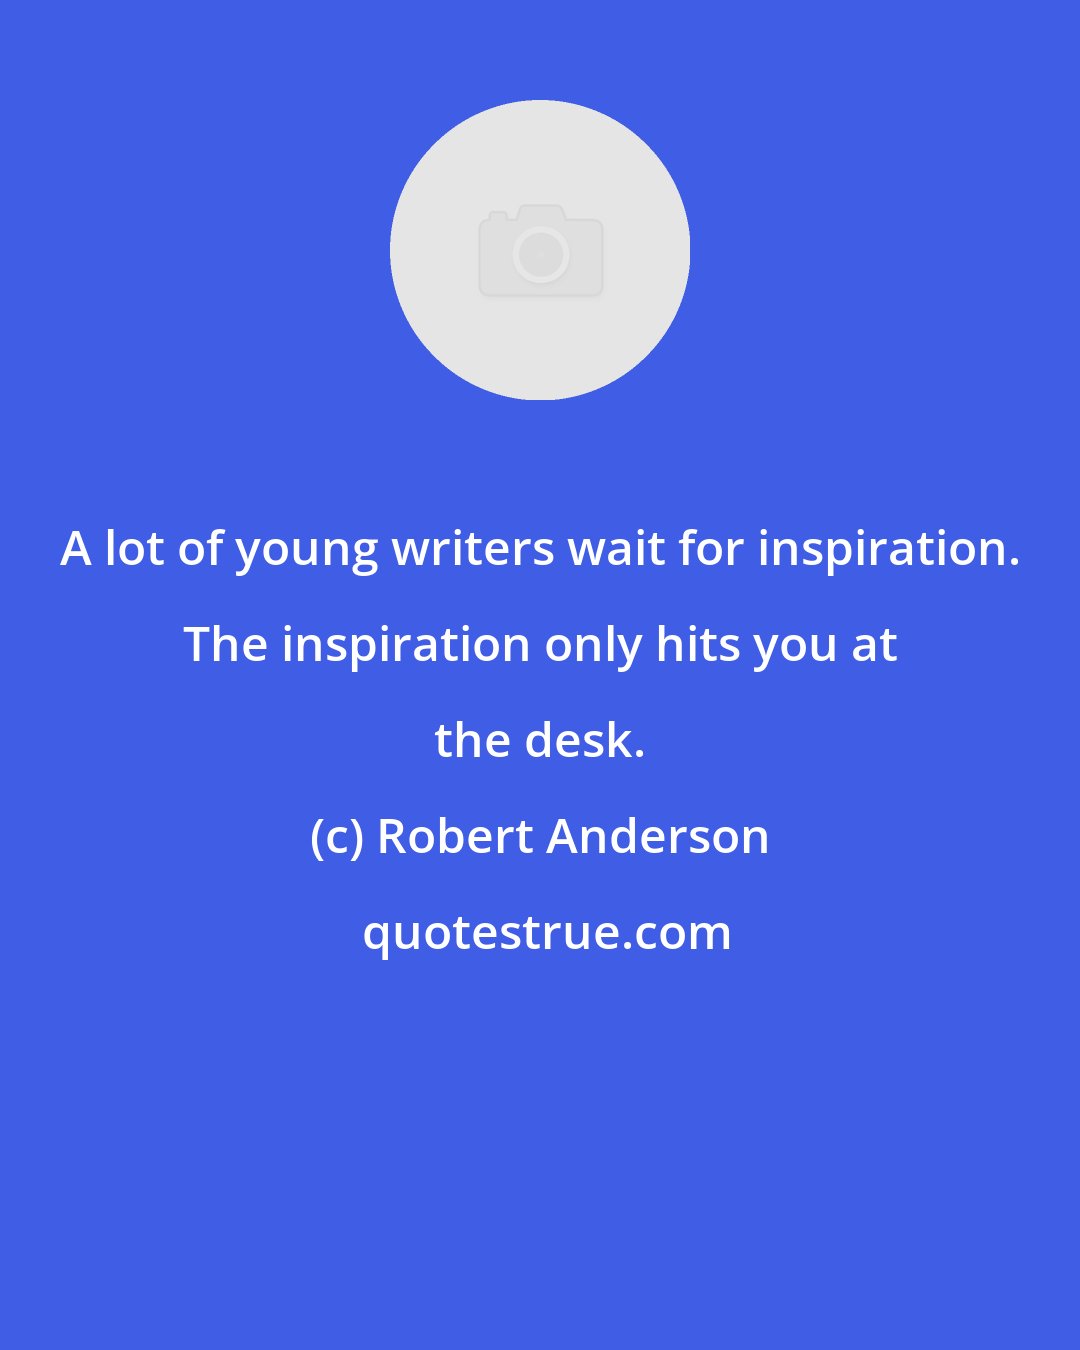 Robert Anderson: A lot of young writers wait for inspiration. The inspiration only hits you at the desk.